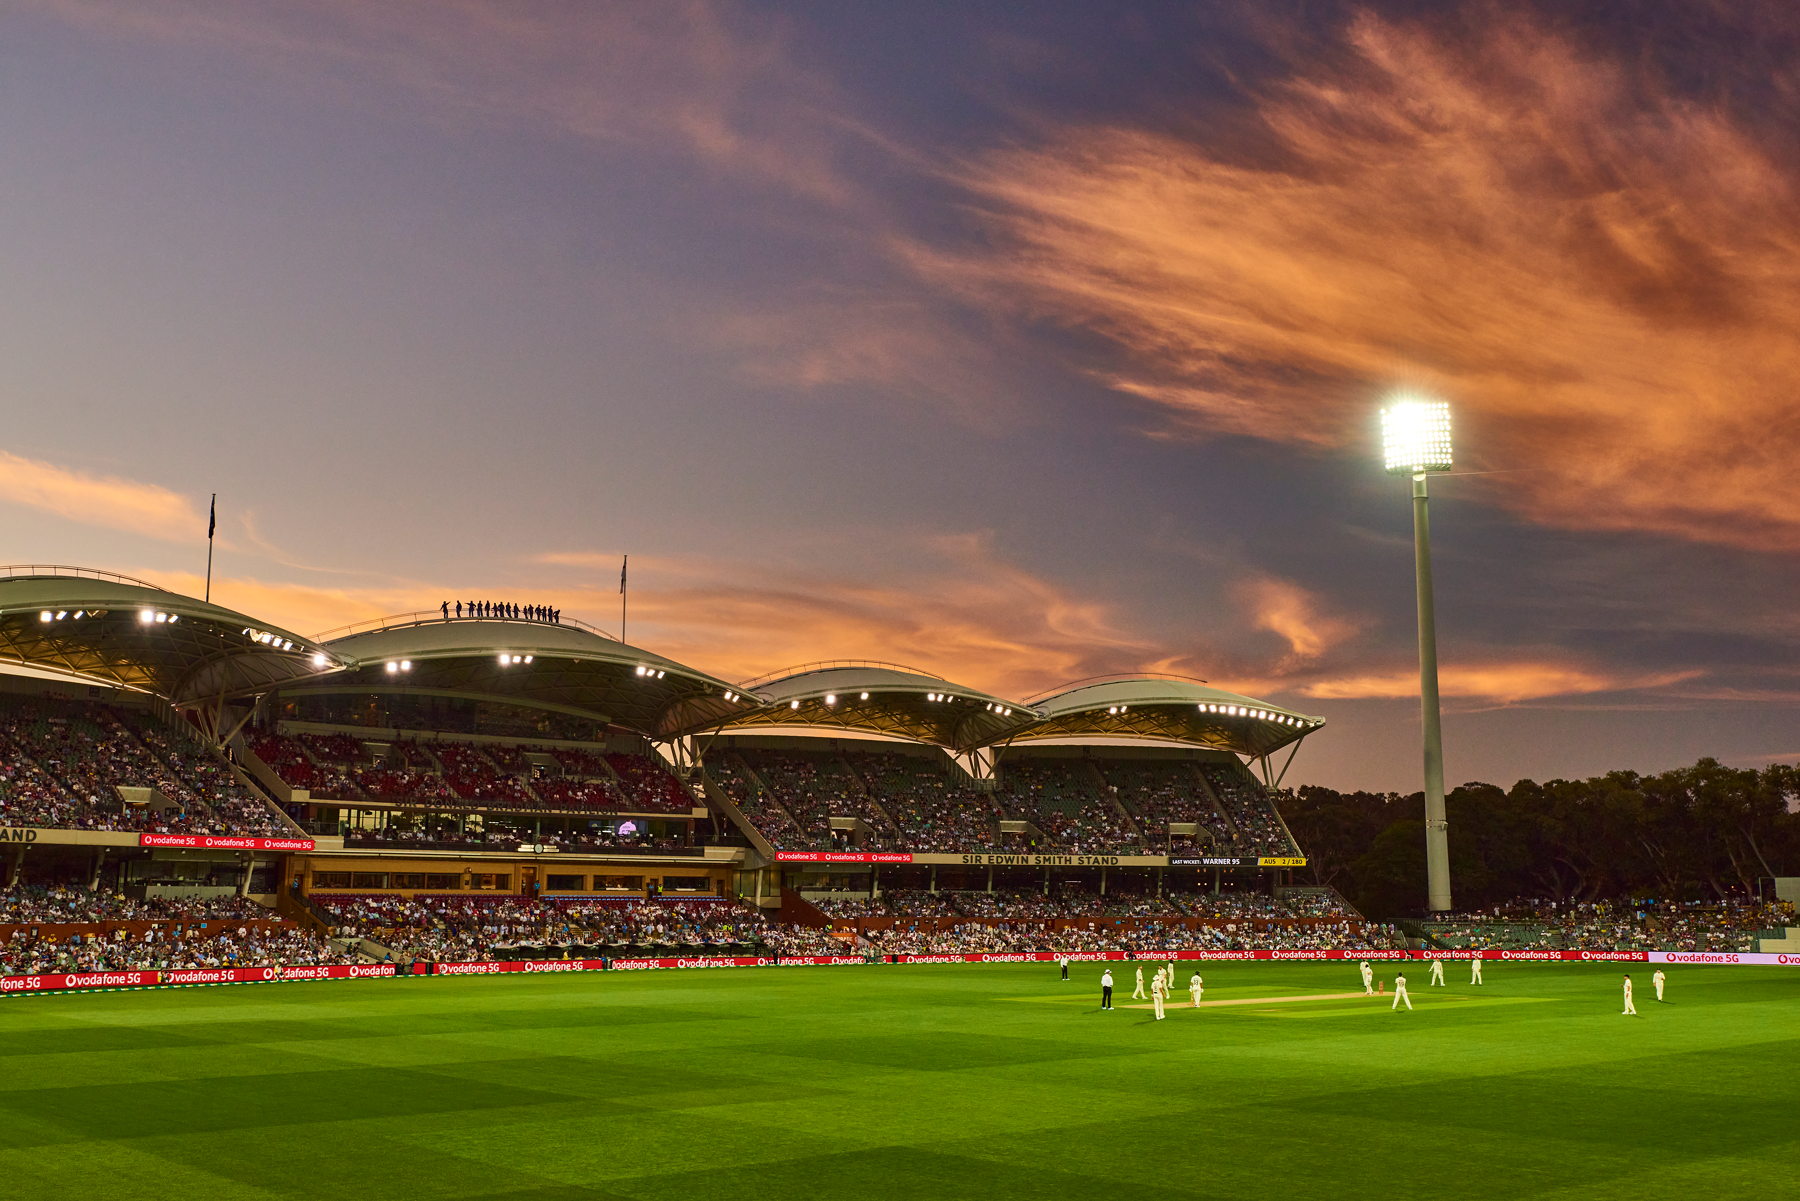 South Australia’s international fixture confirmed for 2022-23